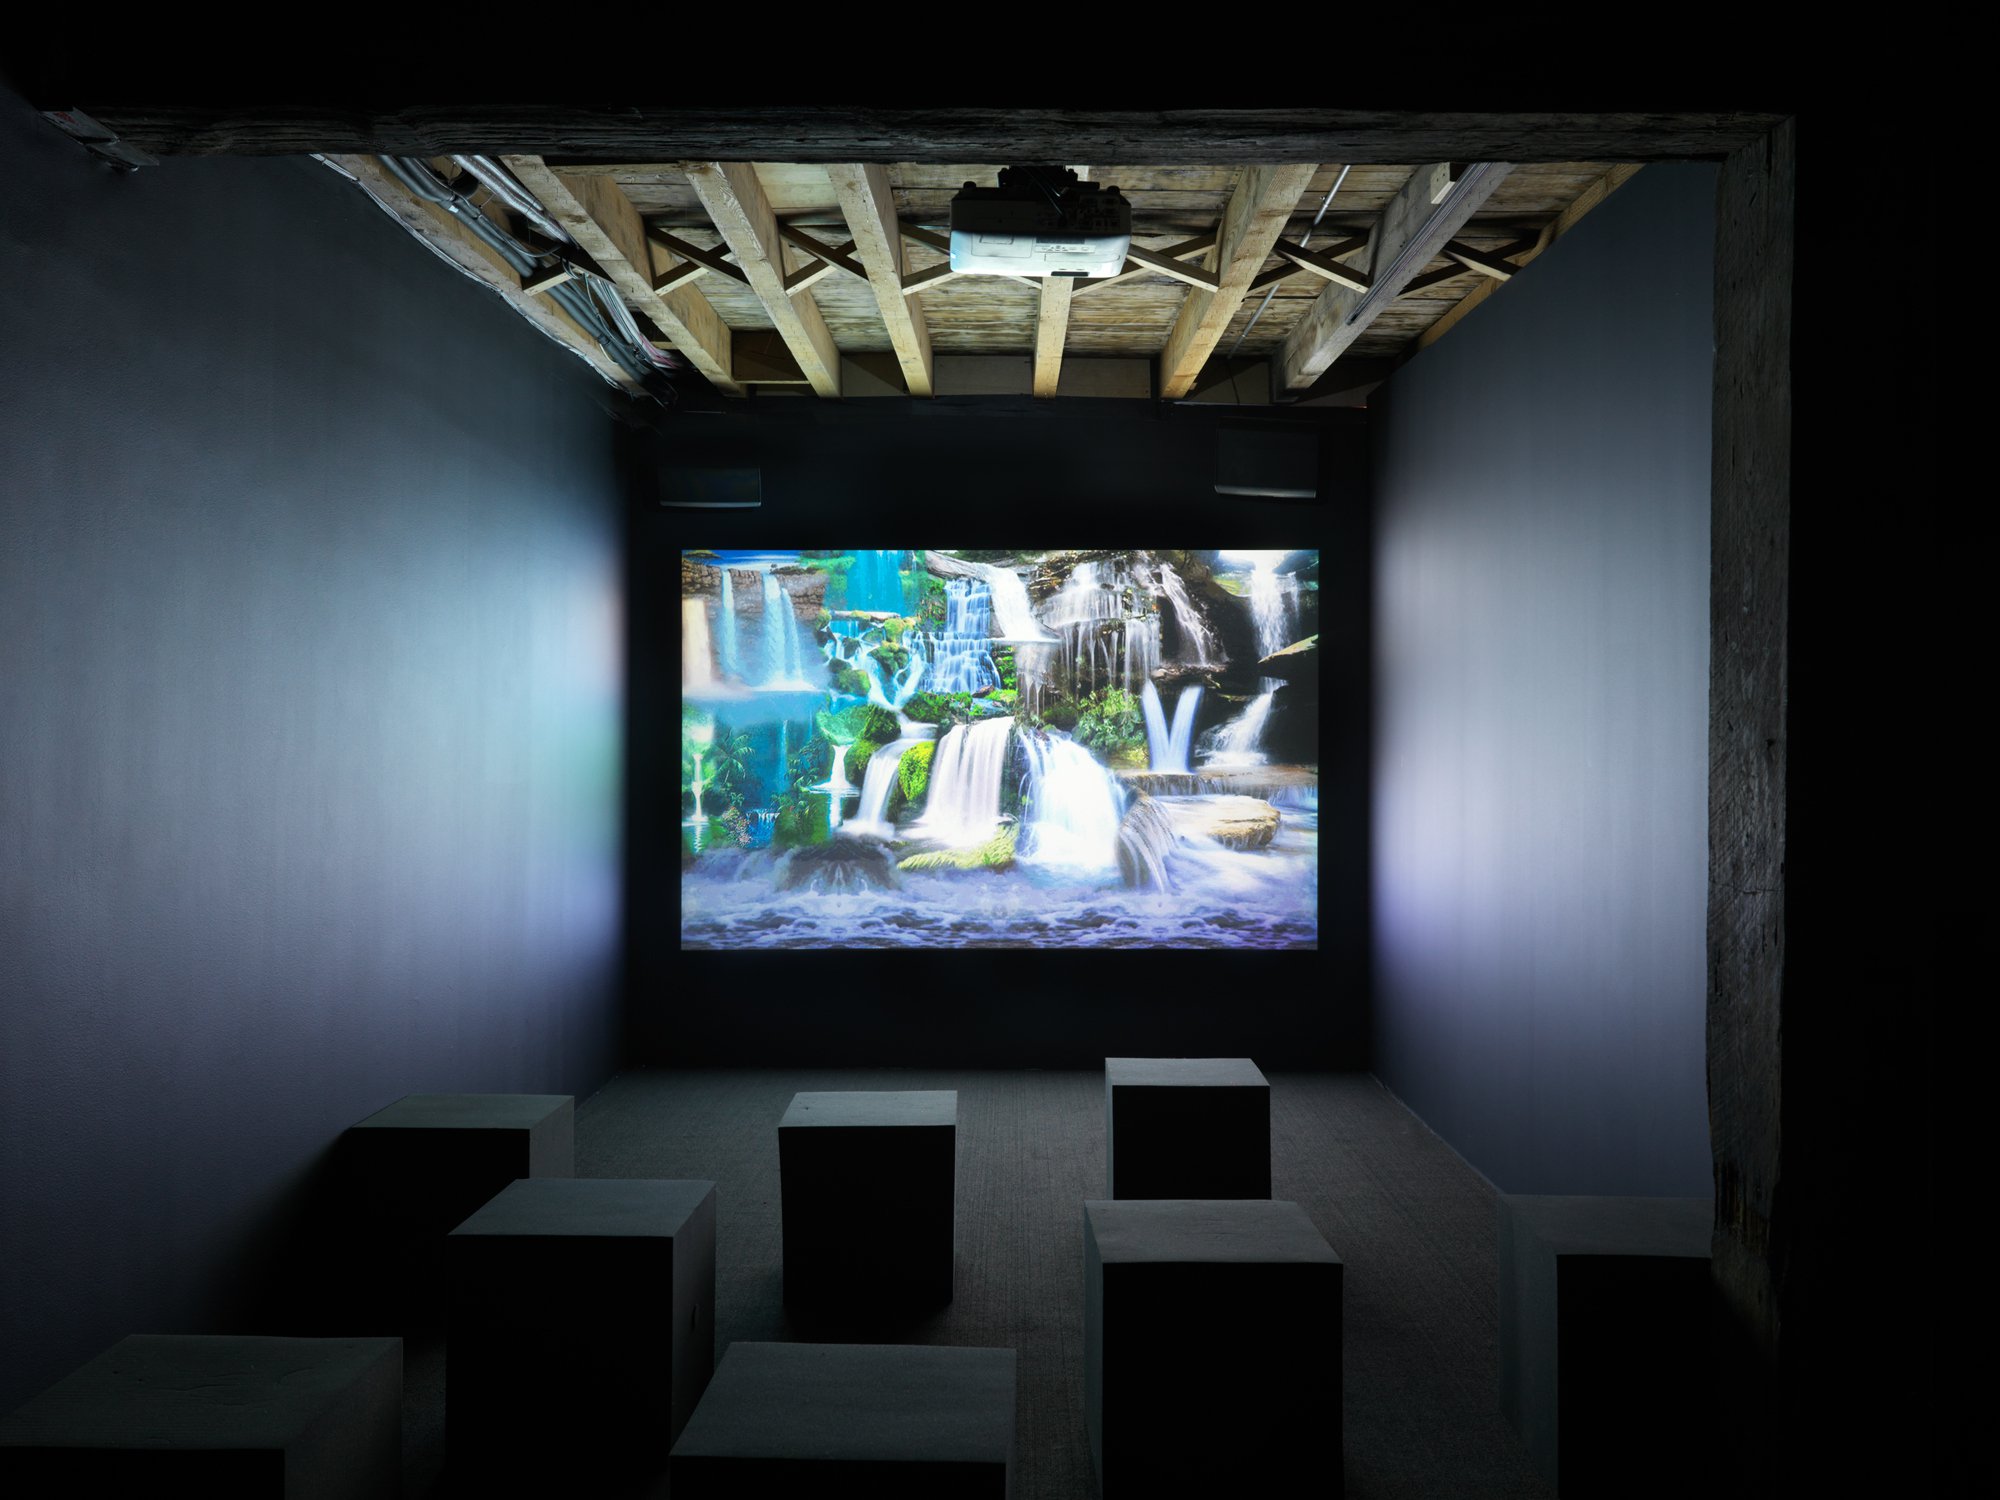 Photo of a small dark art gallery theater. Projected onto the wall is a scenic and serene view of many beautiful luscious waterfalls white and blue water flowing into a pool of water.